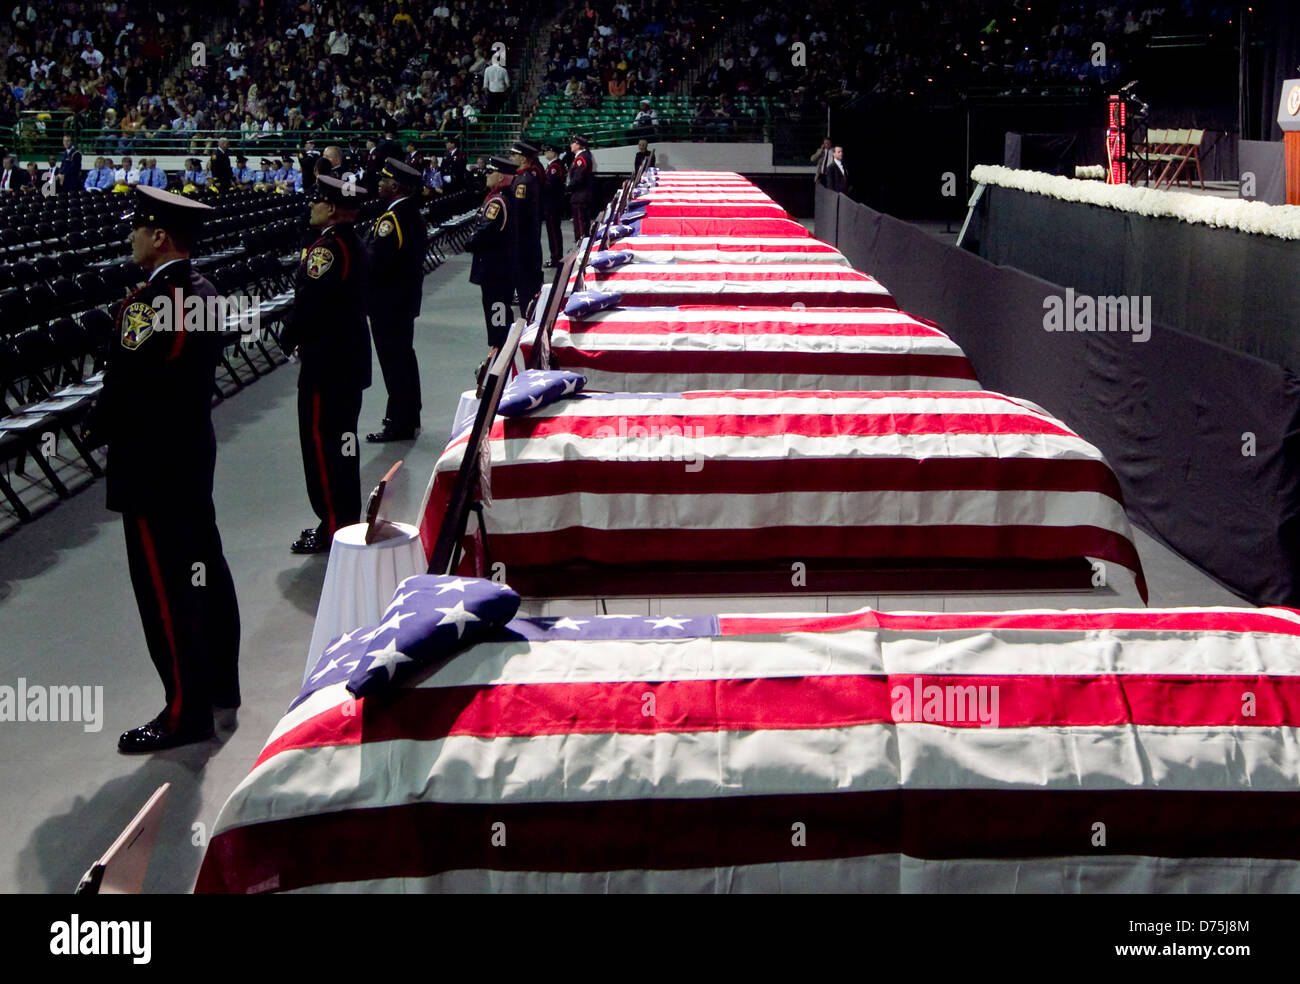 Firefighters stand guard in front of caskets covered in US flags during memorial service in Waco, Texas Stock Photo